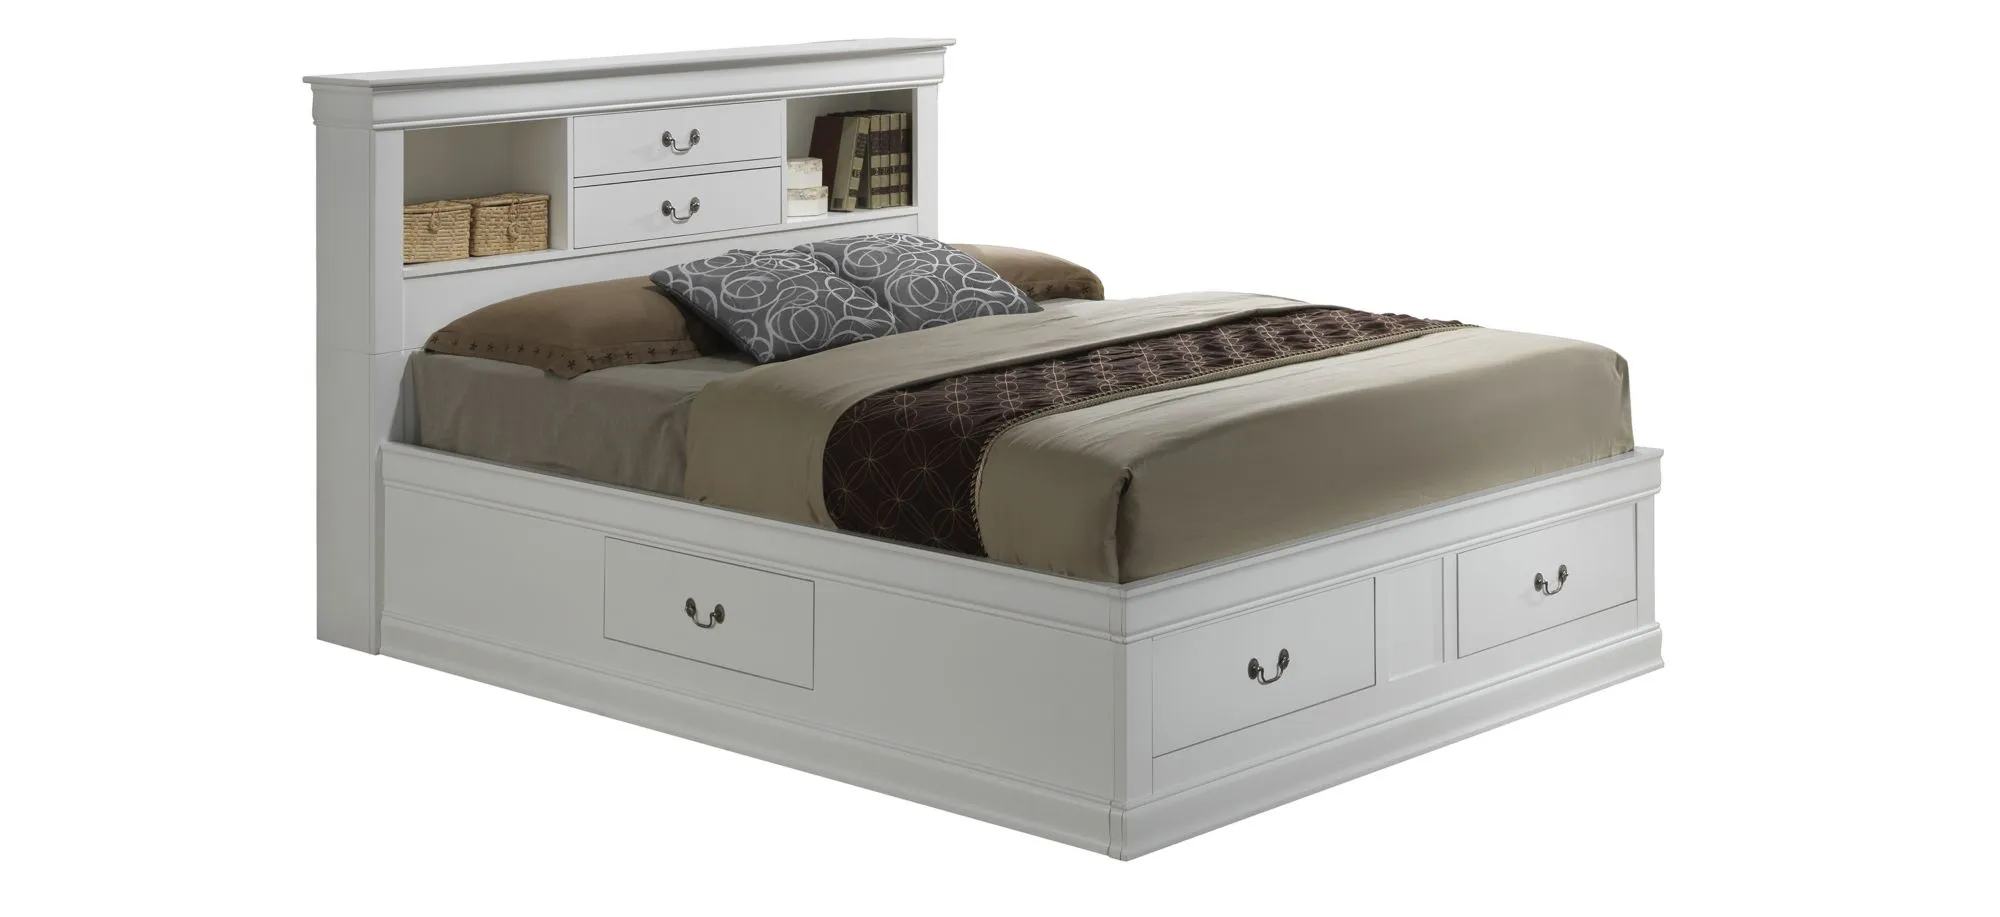 Rossie Captains Storage Bed in White by Glory Furniture